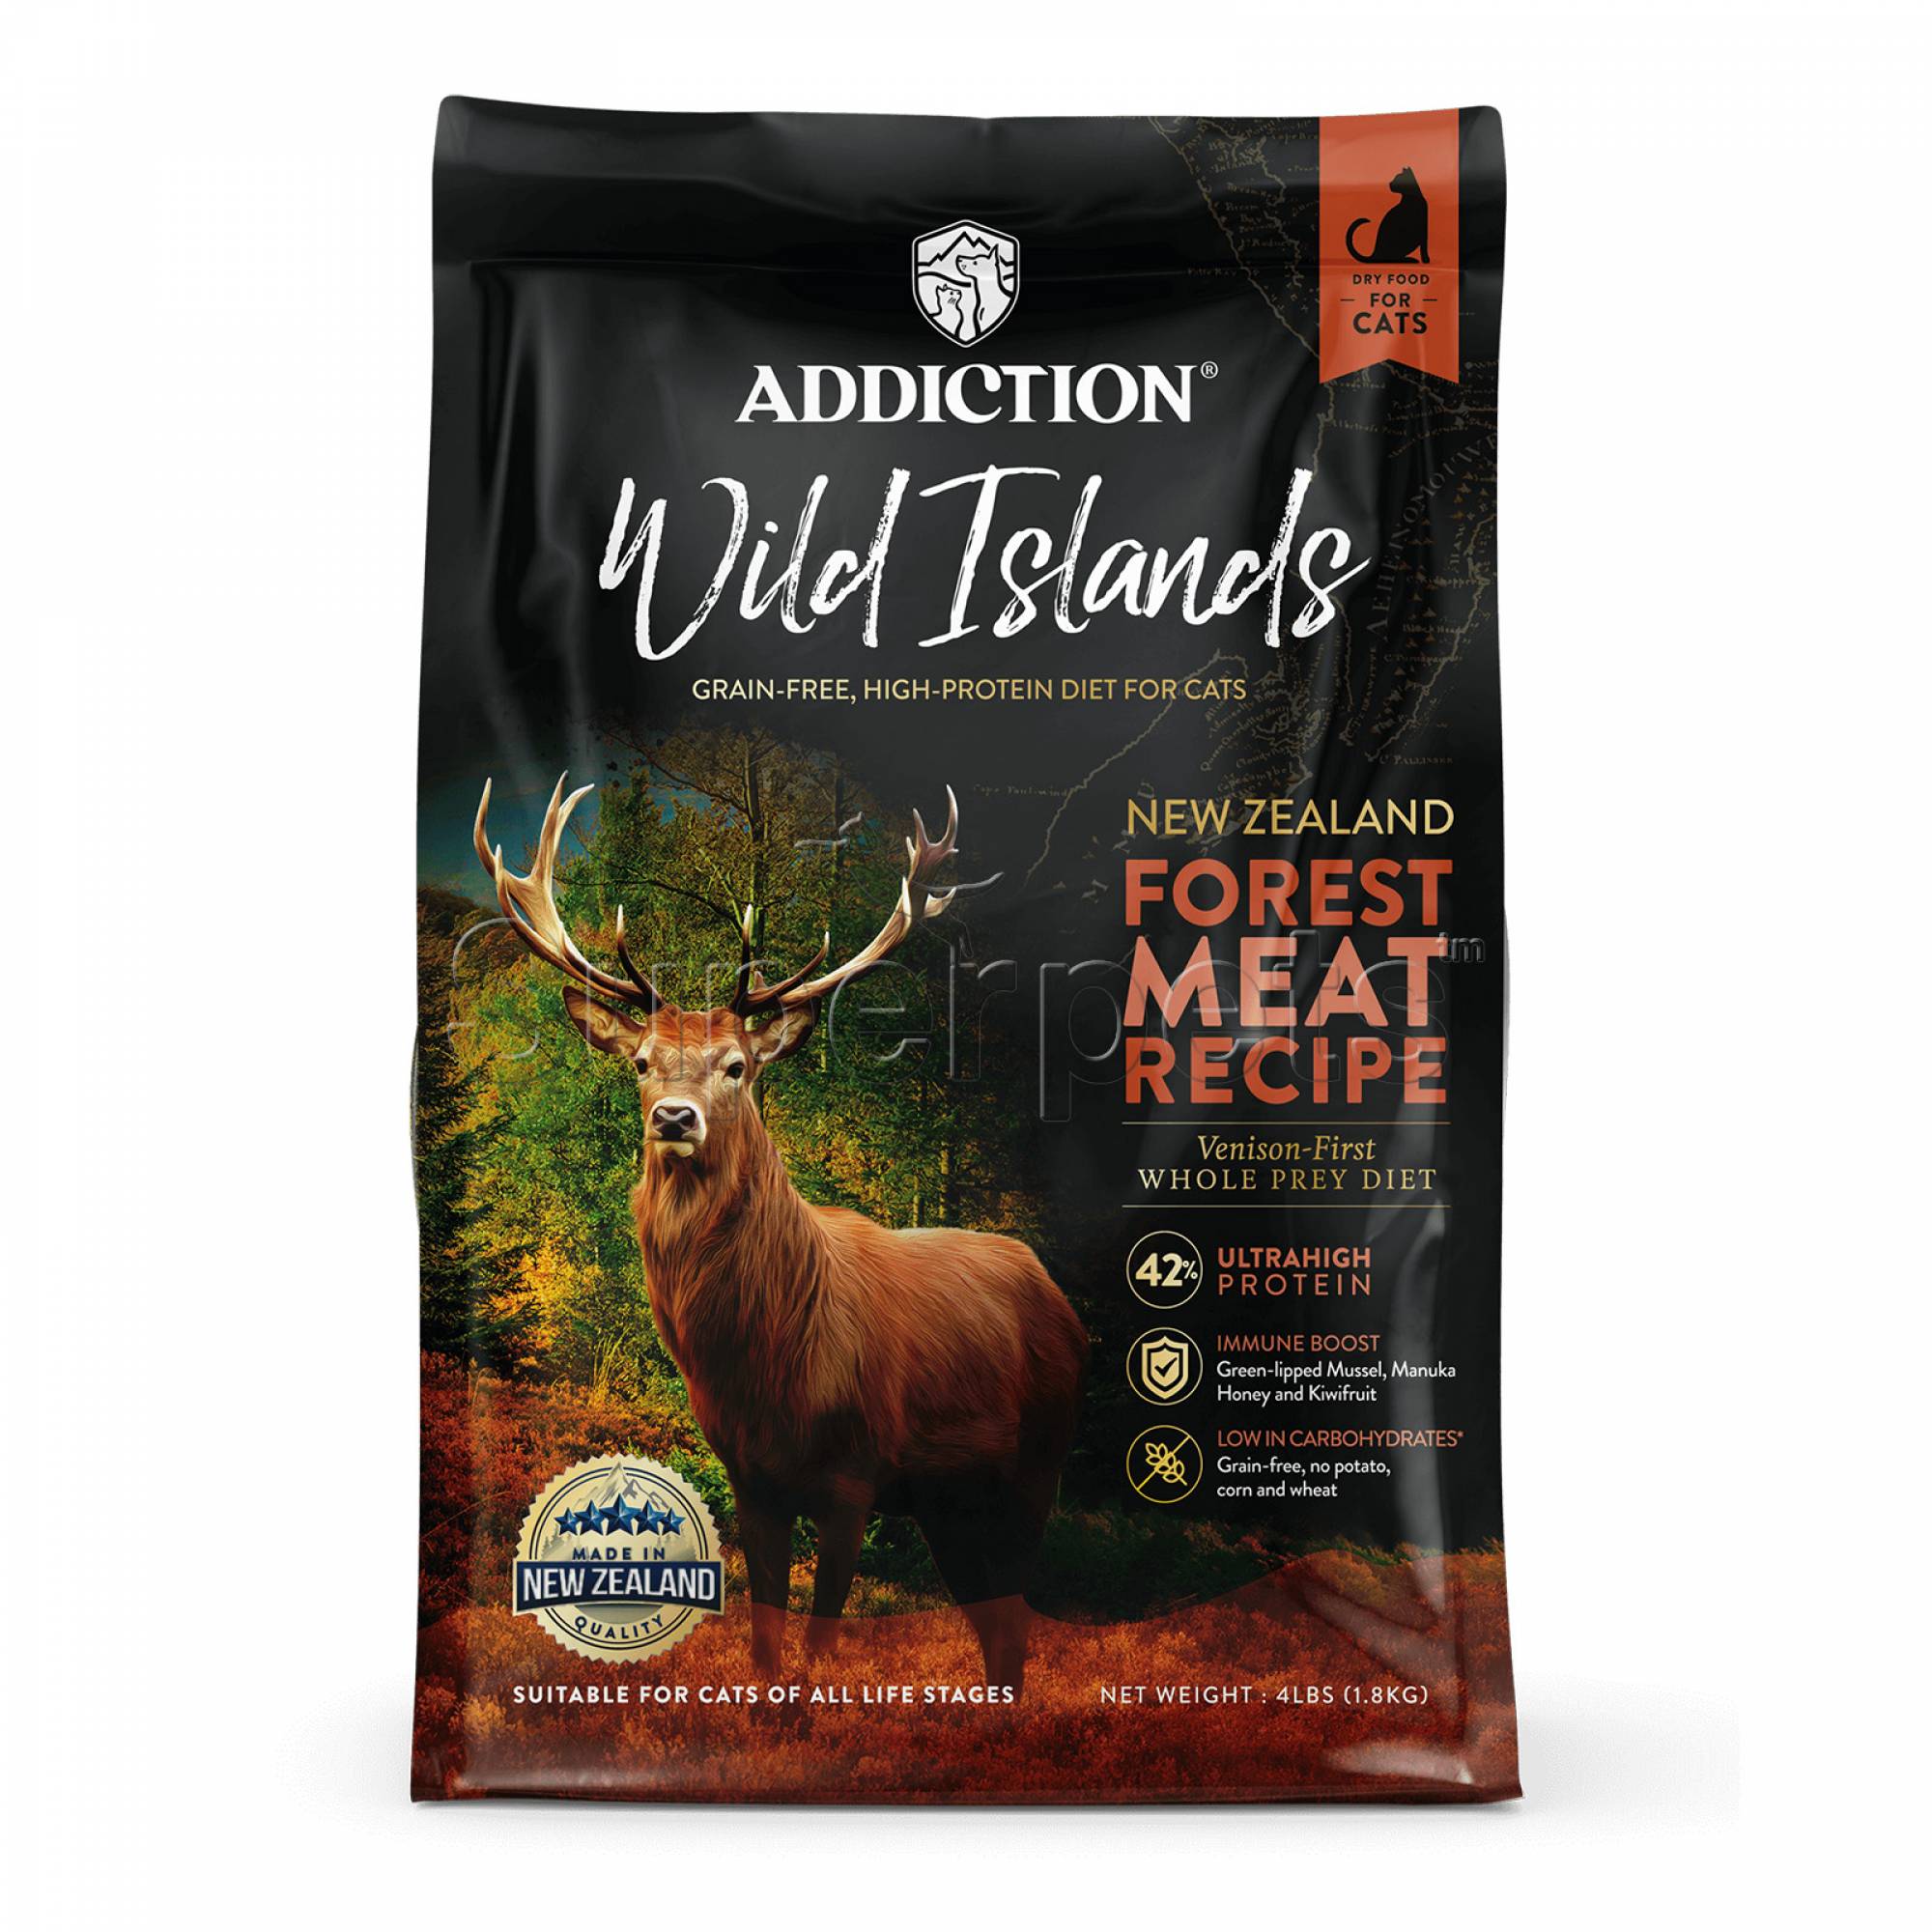 Addiction Wild Islands NZ Forest Meat Recipe Venison-First Dry Cat Food (4lb) (79298)